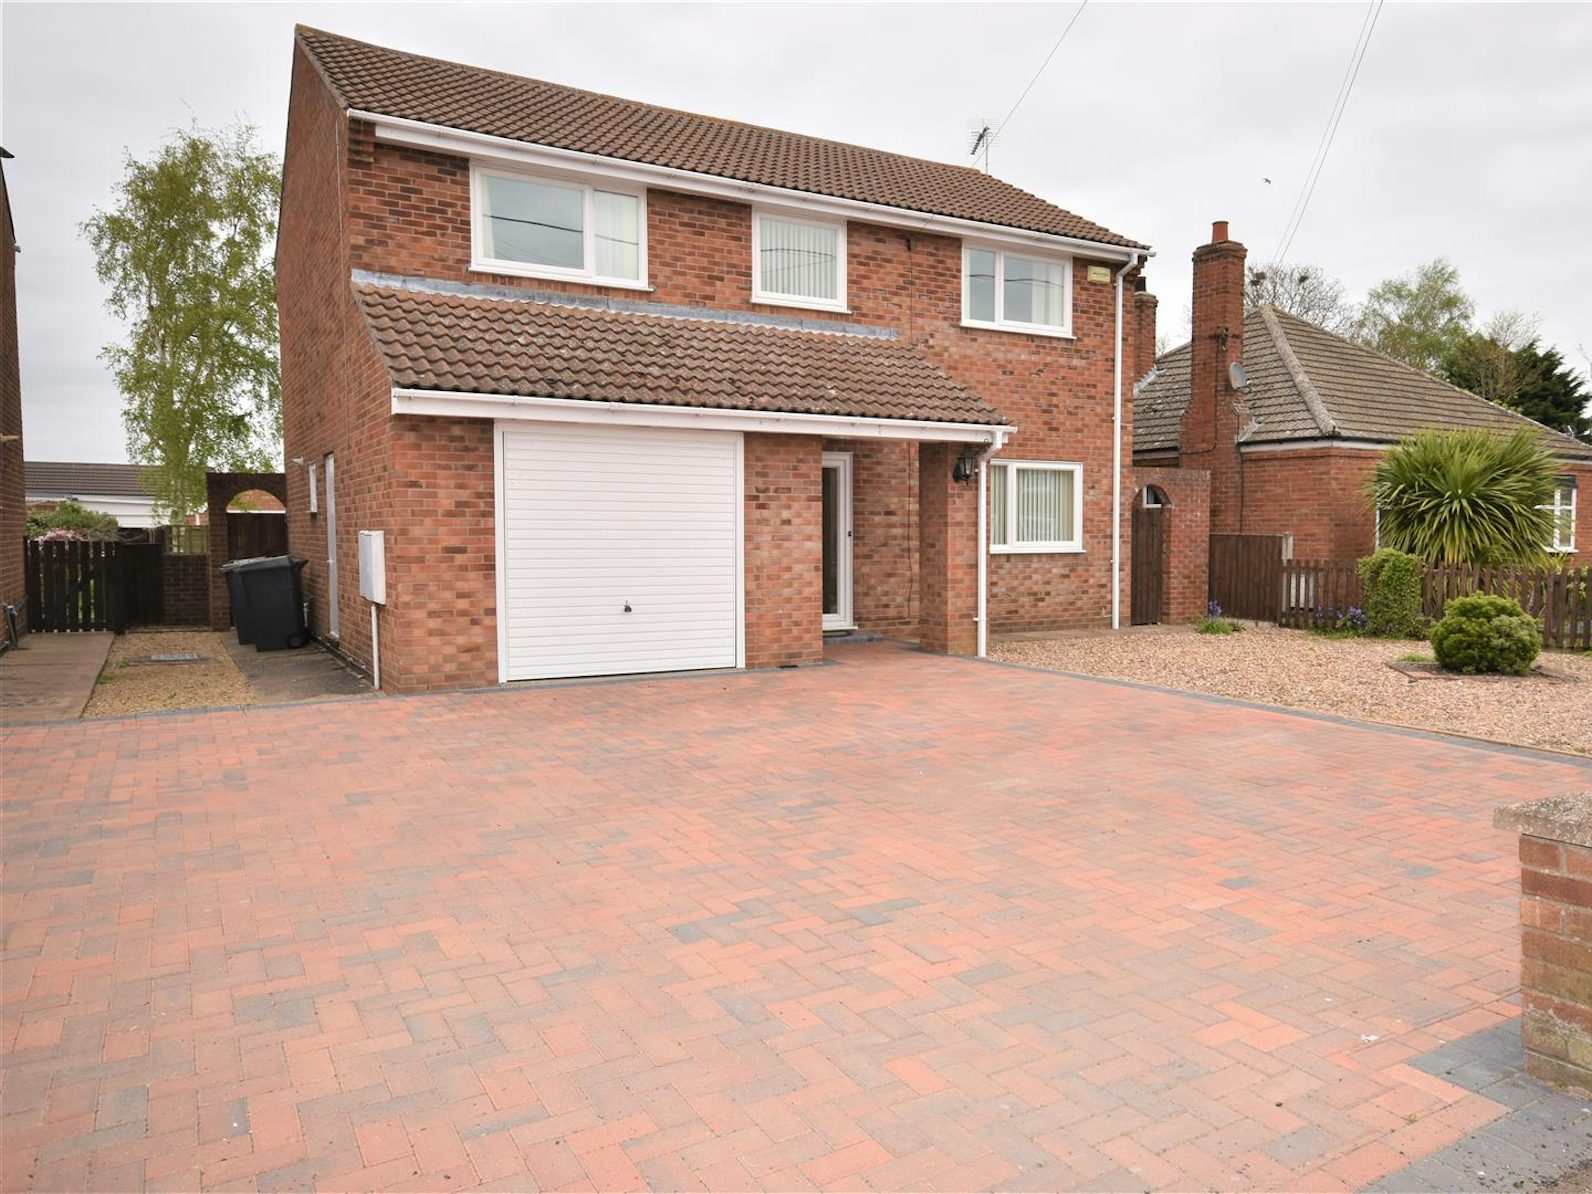 Detached house for sale on Kyme Road Heckington, Sleaford, NG34